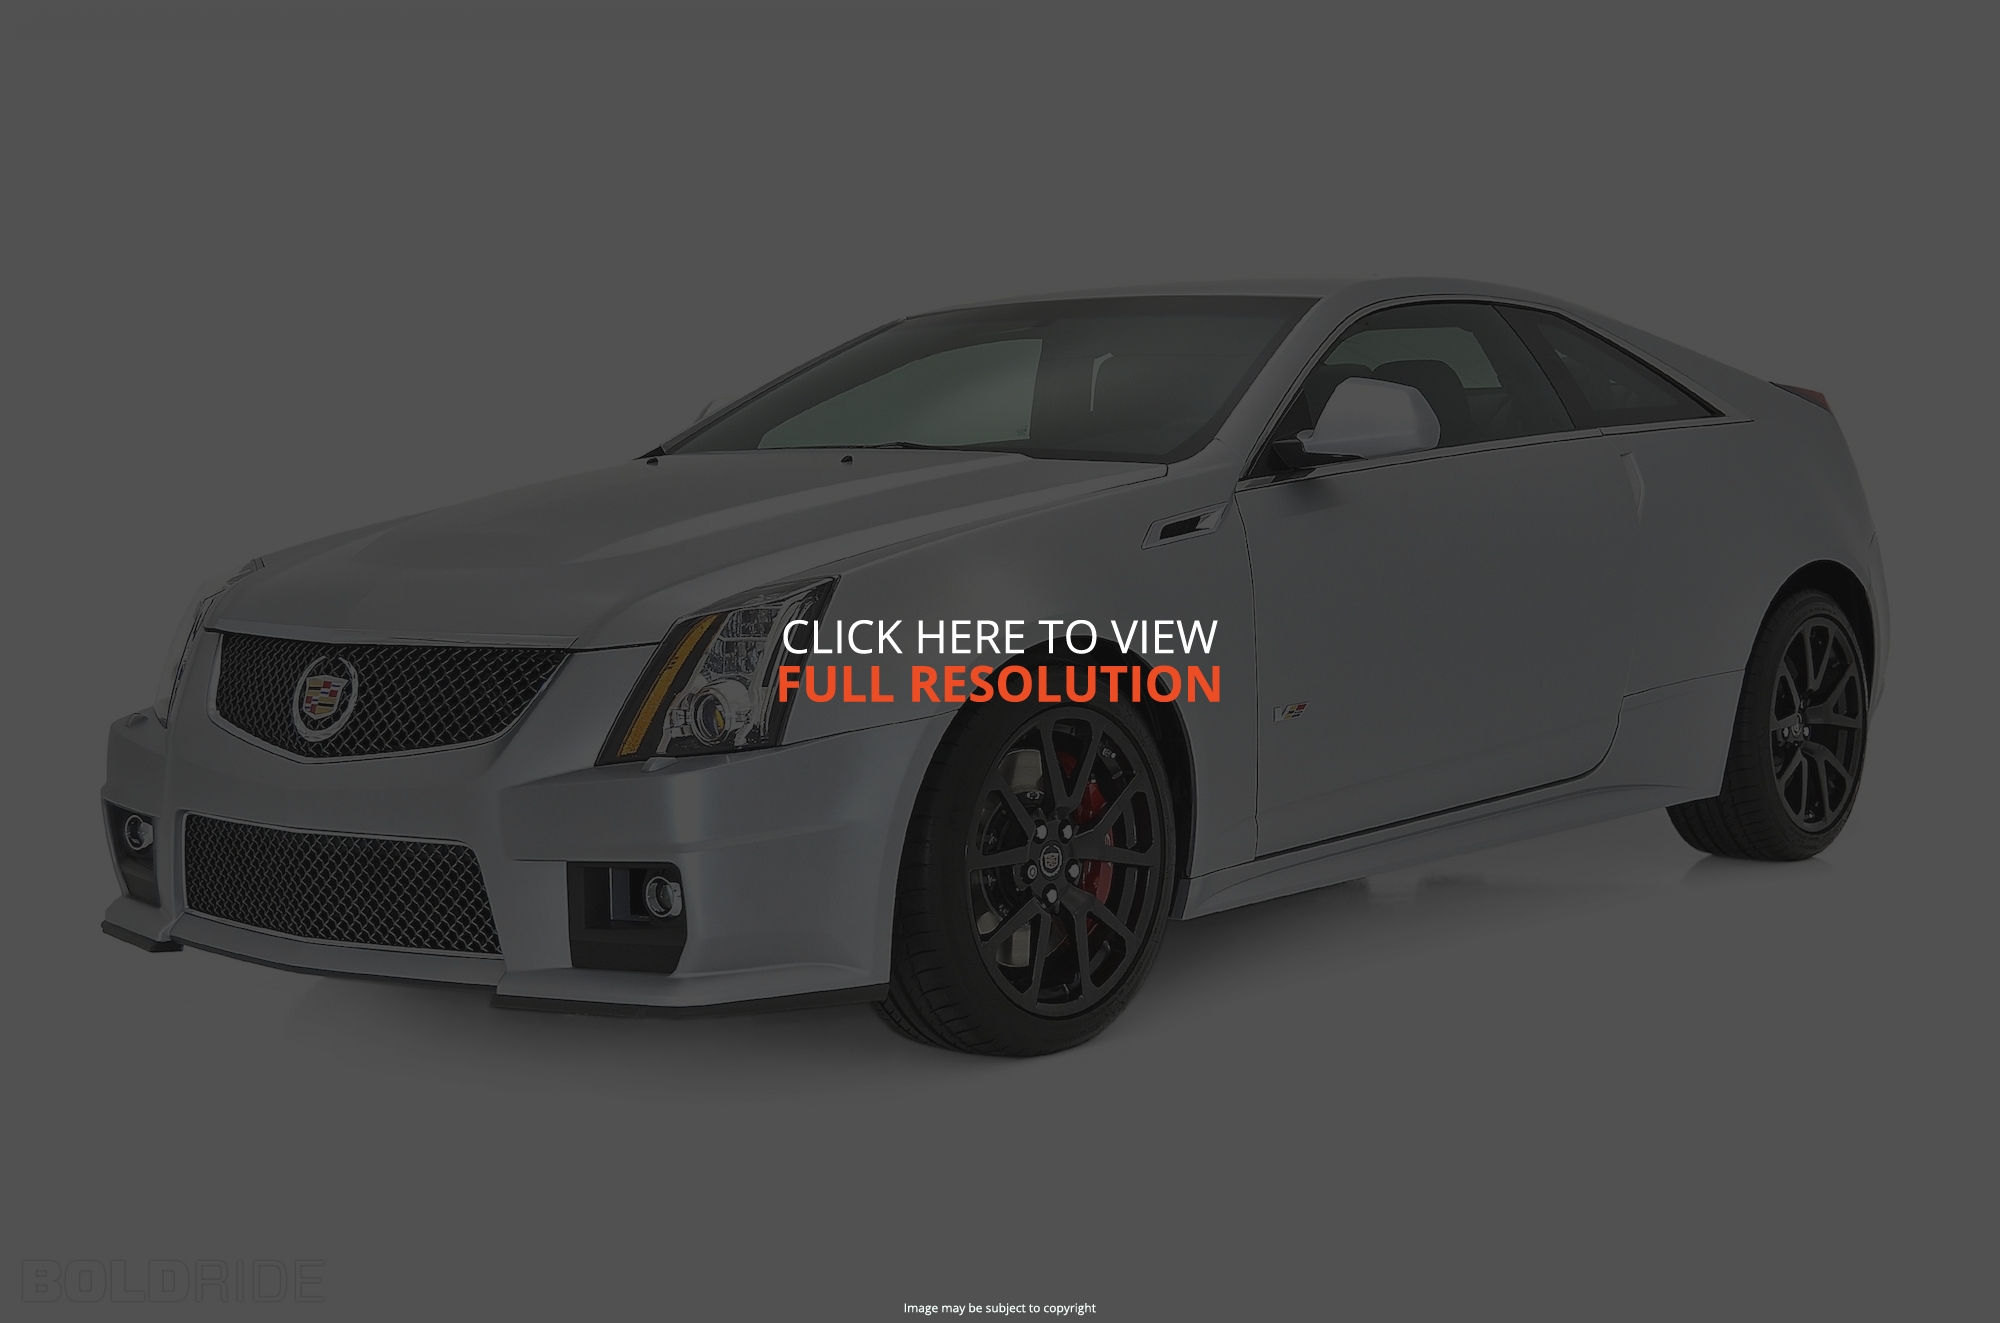 Cadillac CTS Coupe 2013 #1